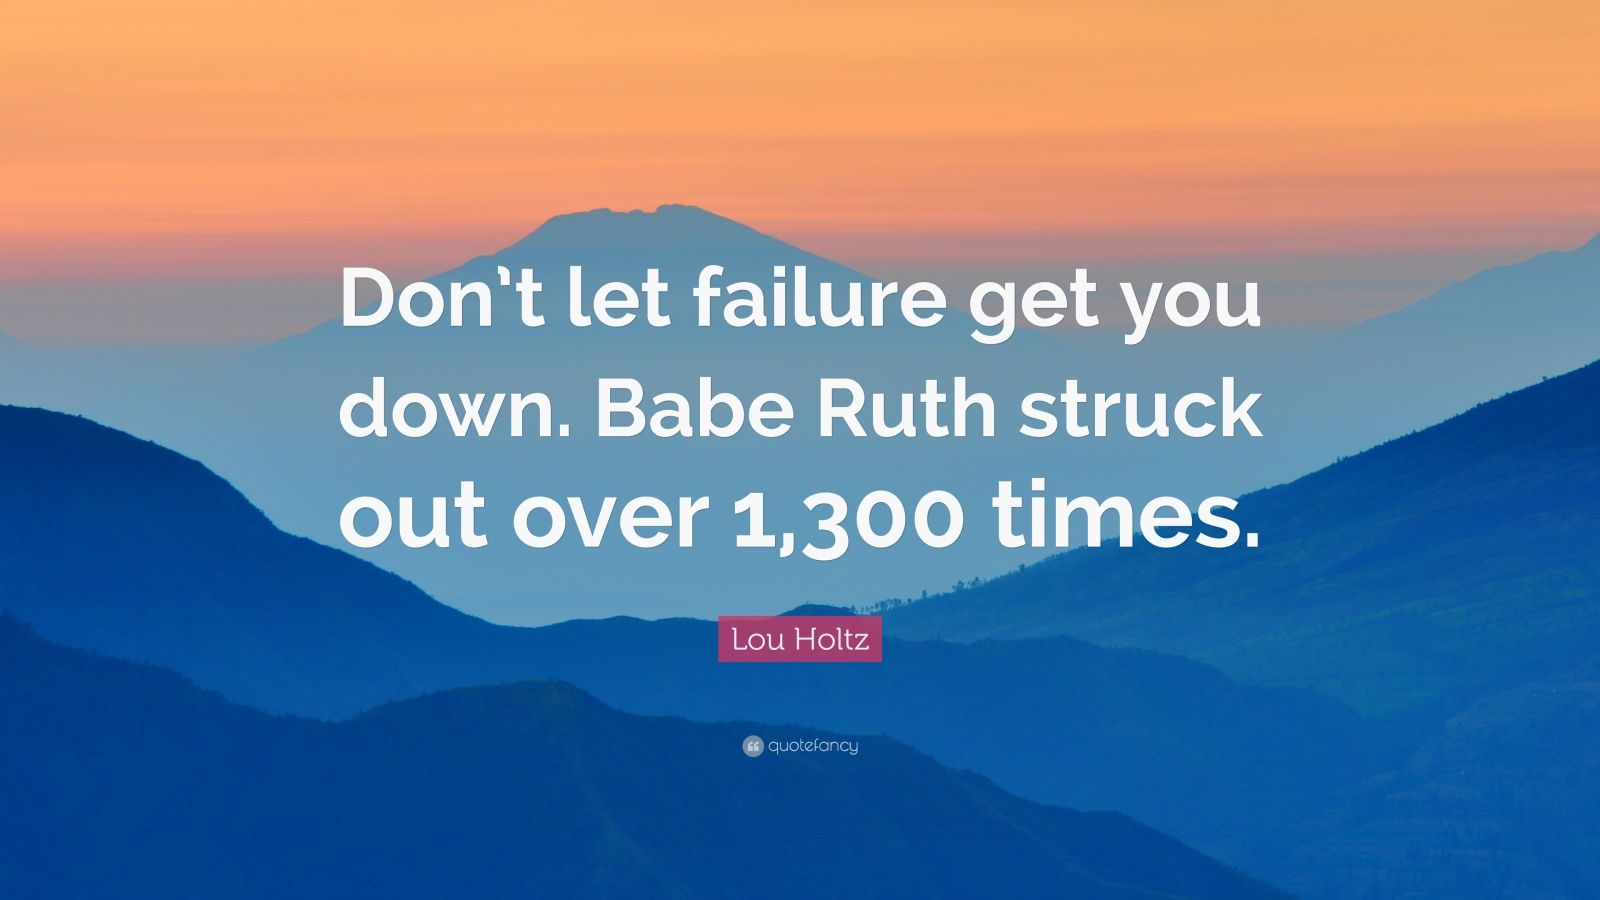 Top 50 Babe Ruth Quotes (2023 Update) - QuoteFancy